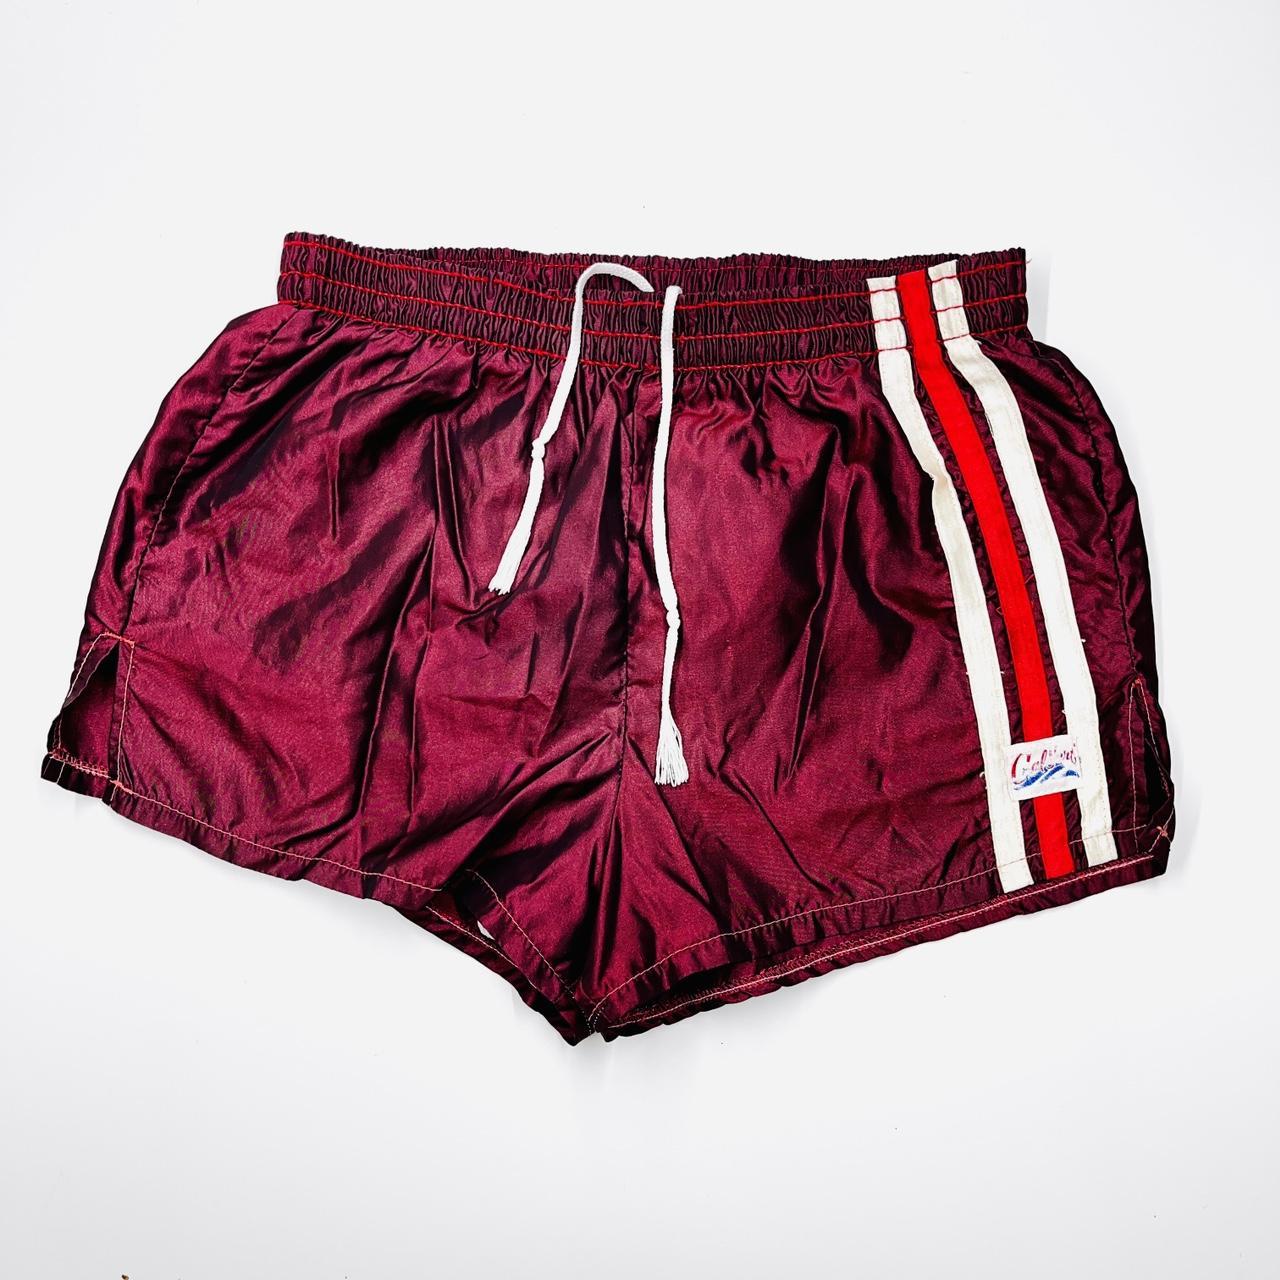 California Waves Women's Burgundy and Red Shorts